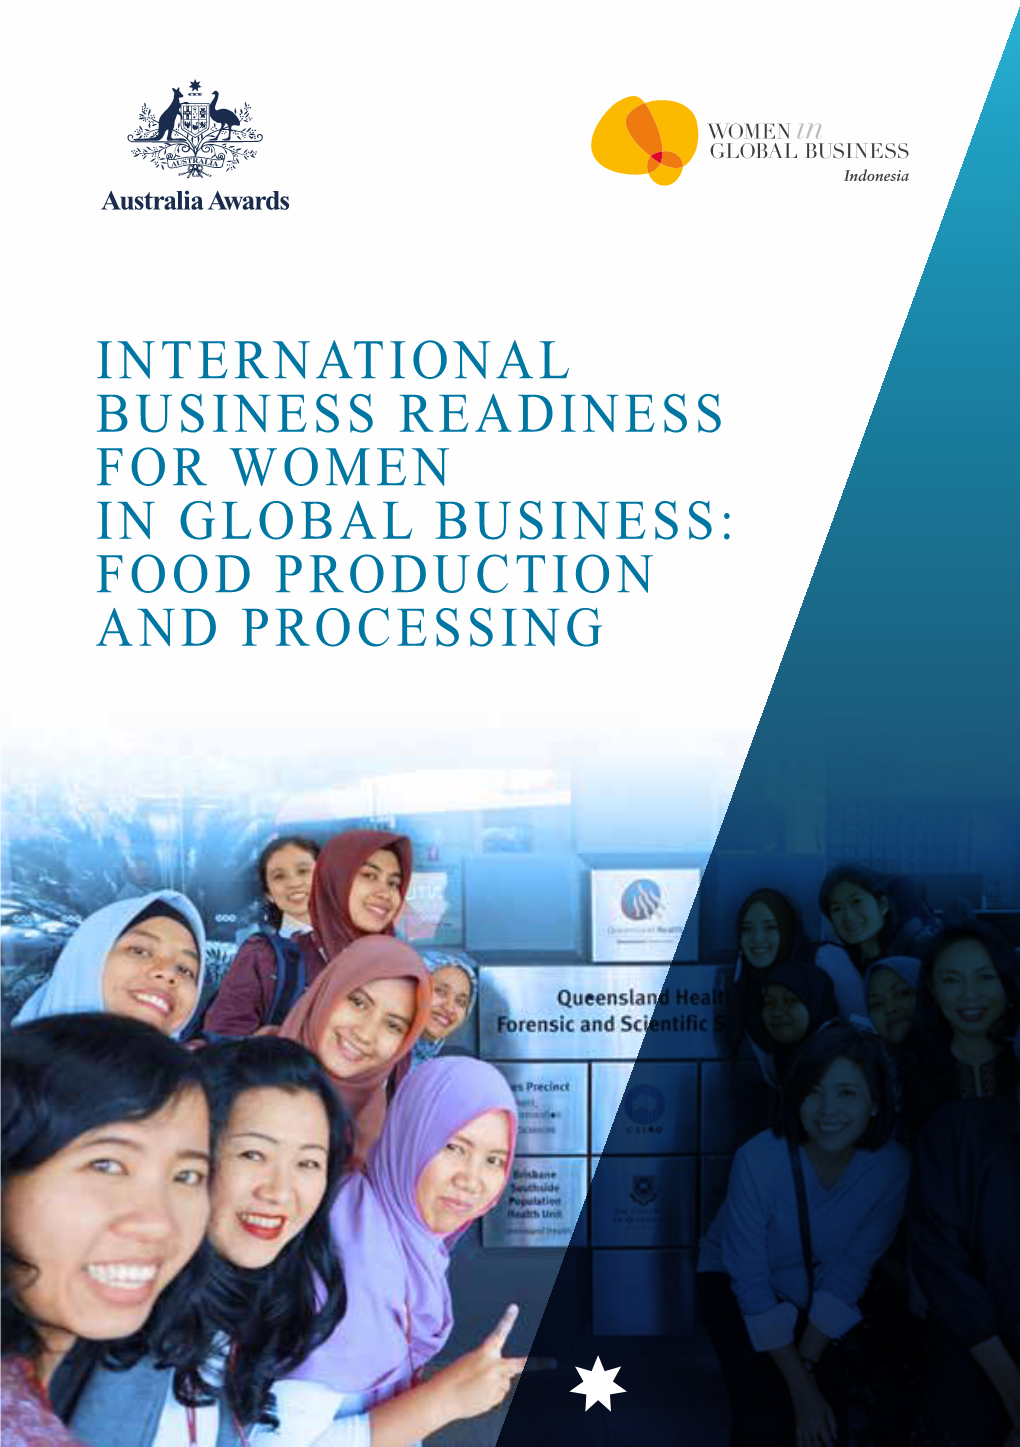 International Business Readiness for Women in Global Business: Food Production and Processing